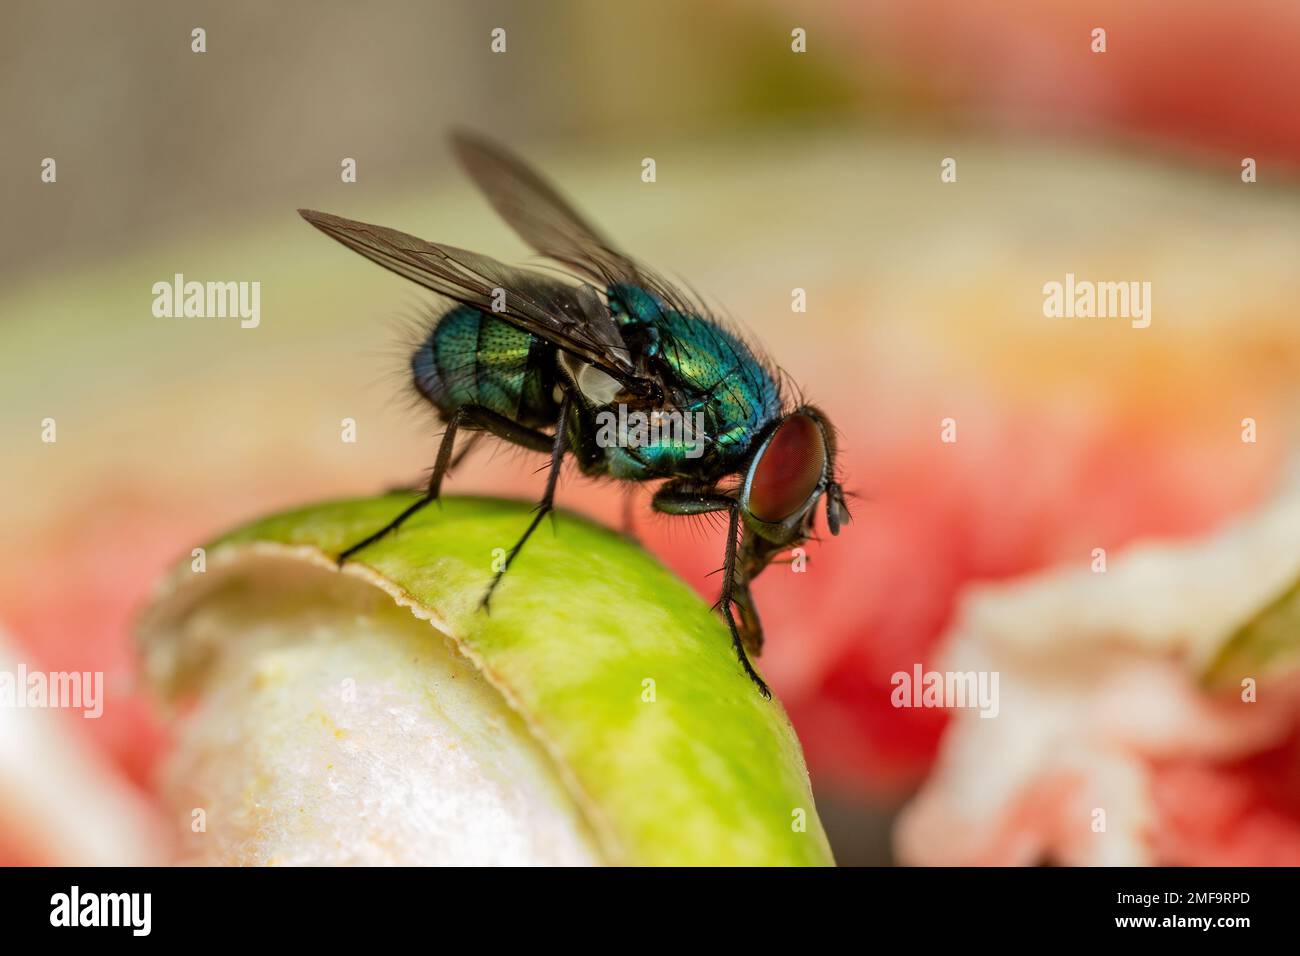 House Fly, Flesh Fly or Meat Fly Sarcophagidae Parasite Insect Pest on Fruit. Danger of Disease Vector, Pathogen Transmission or Infection Germ Spread Stock Photo